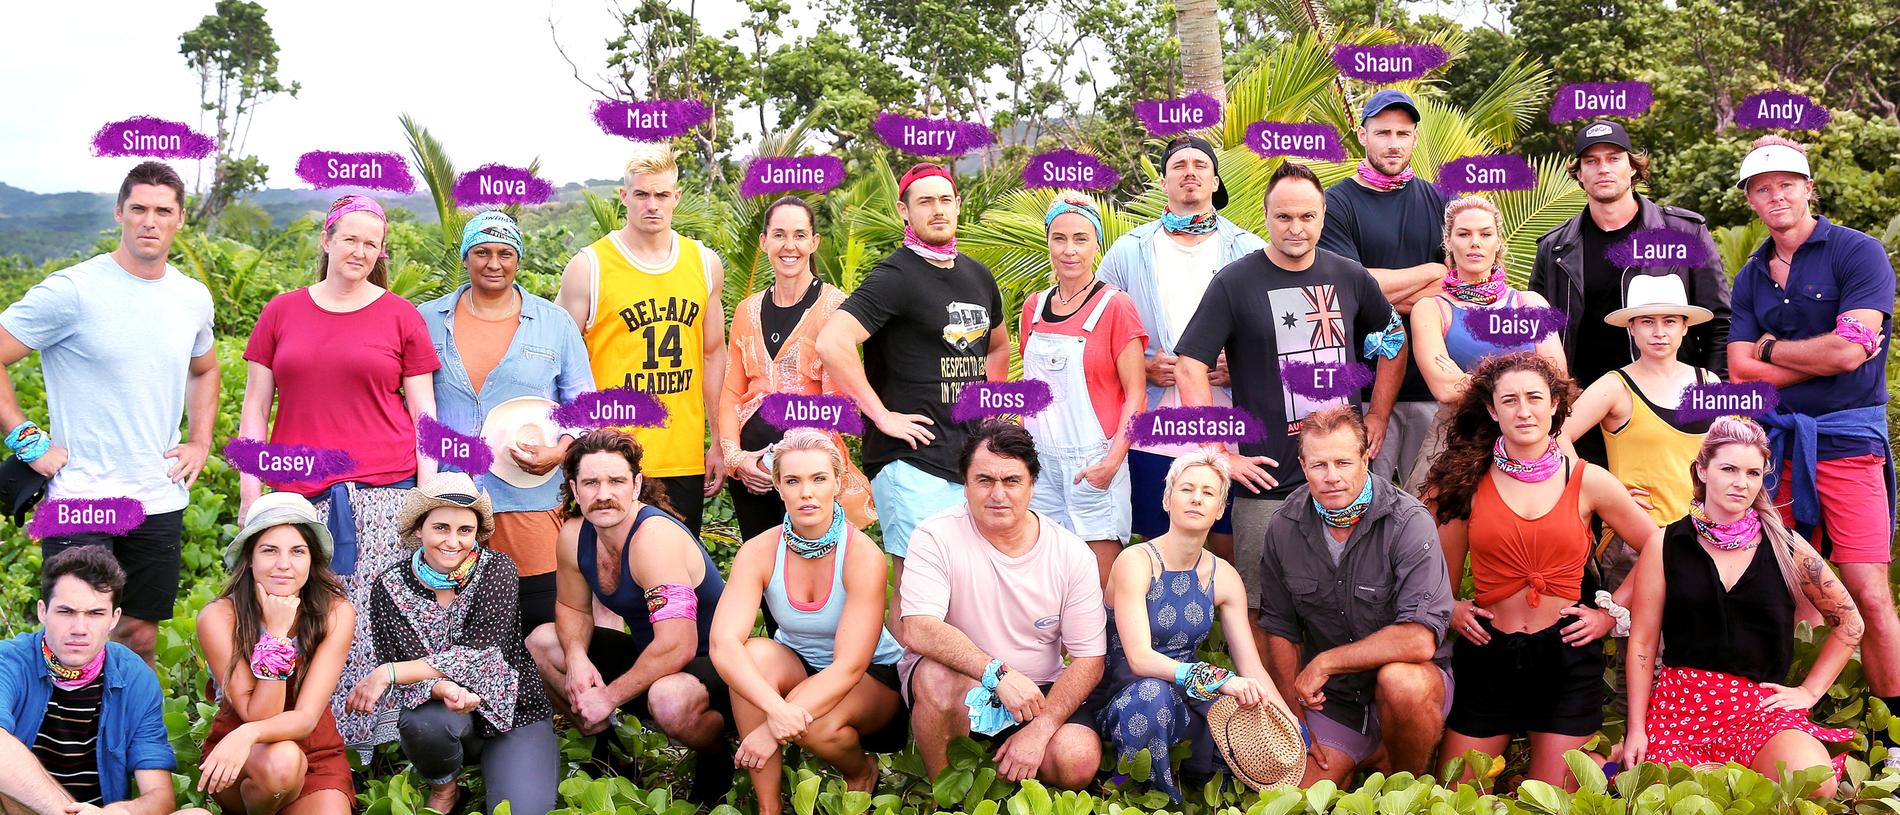 The full cast of this year's Survivor has been revealed. 